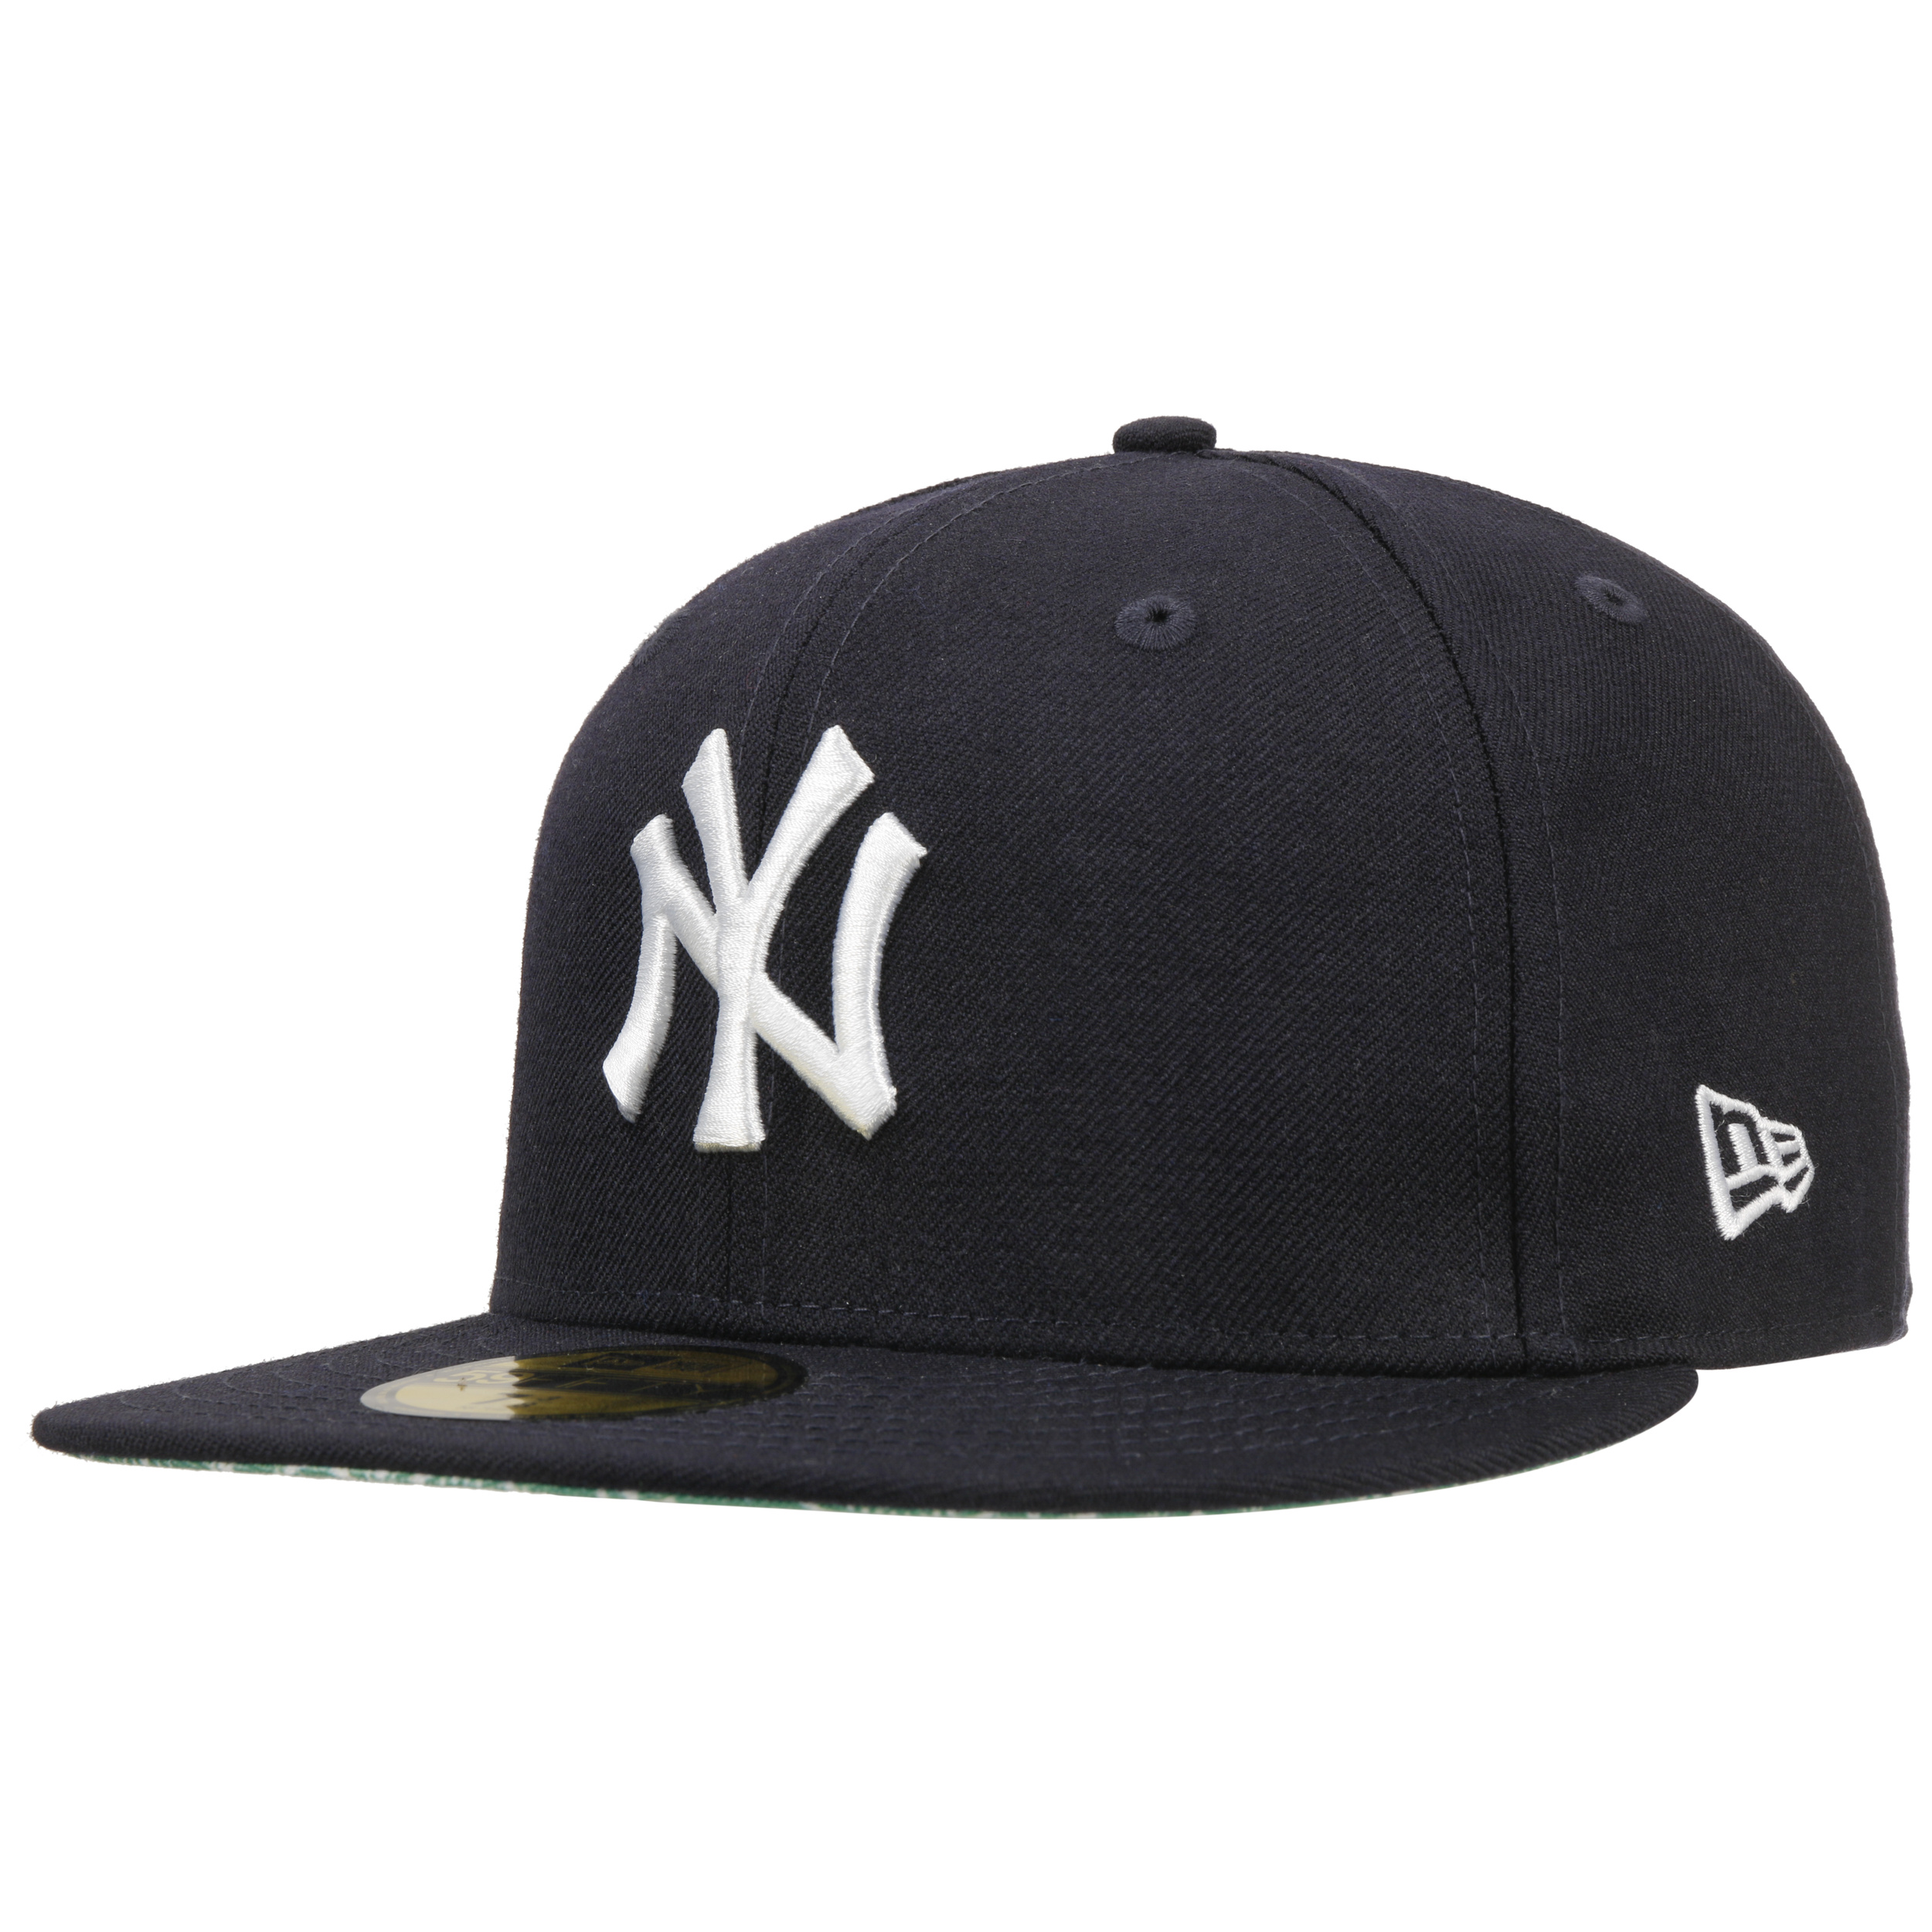 59Fifty Paisley Green Yankees Cap by New Era - 46,95